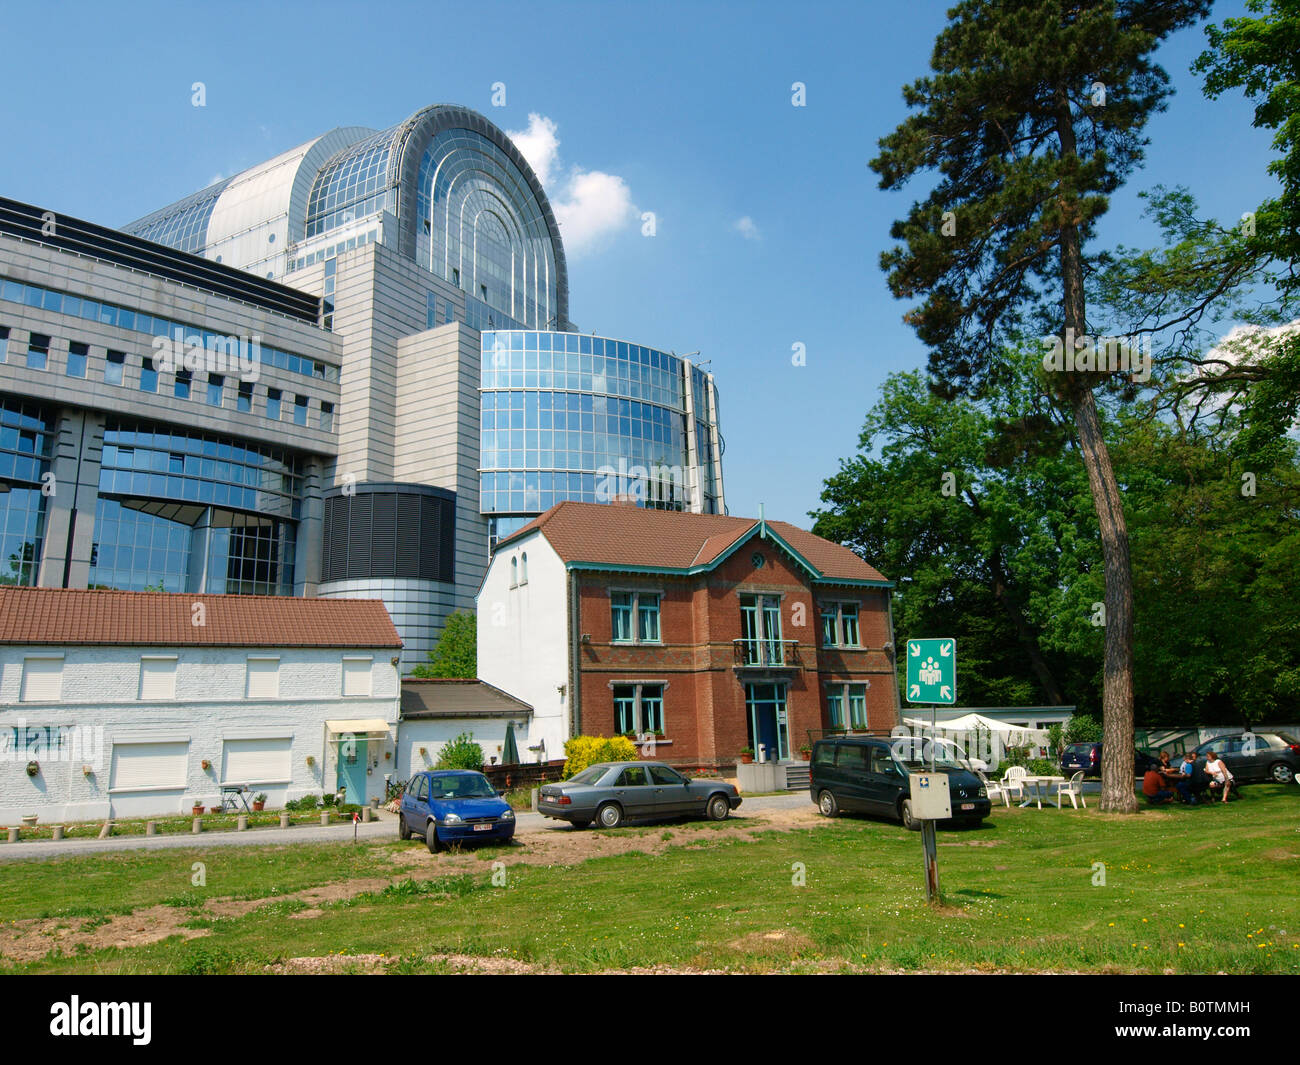 The rear side of the European Parliament building in Brussels, Belgium Stock Photo